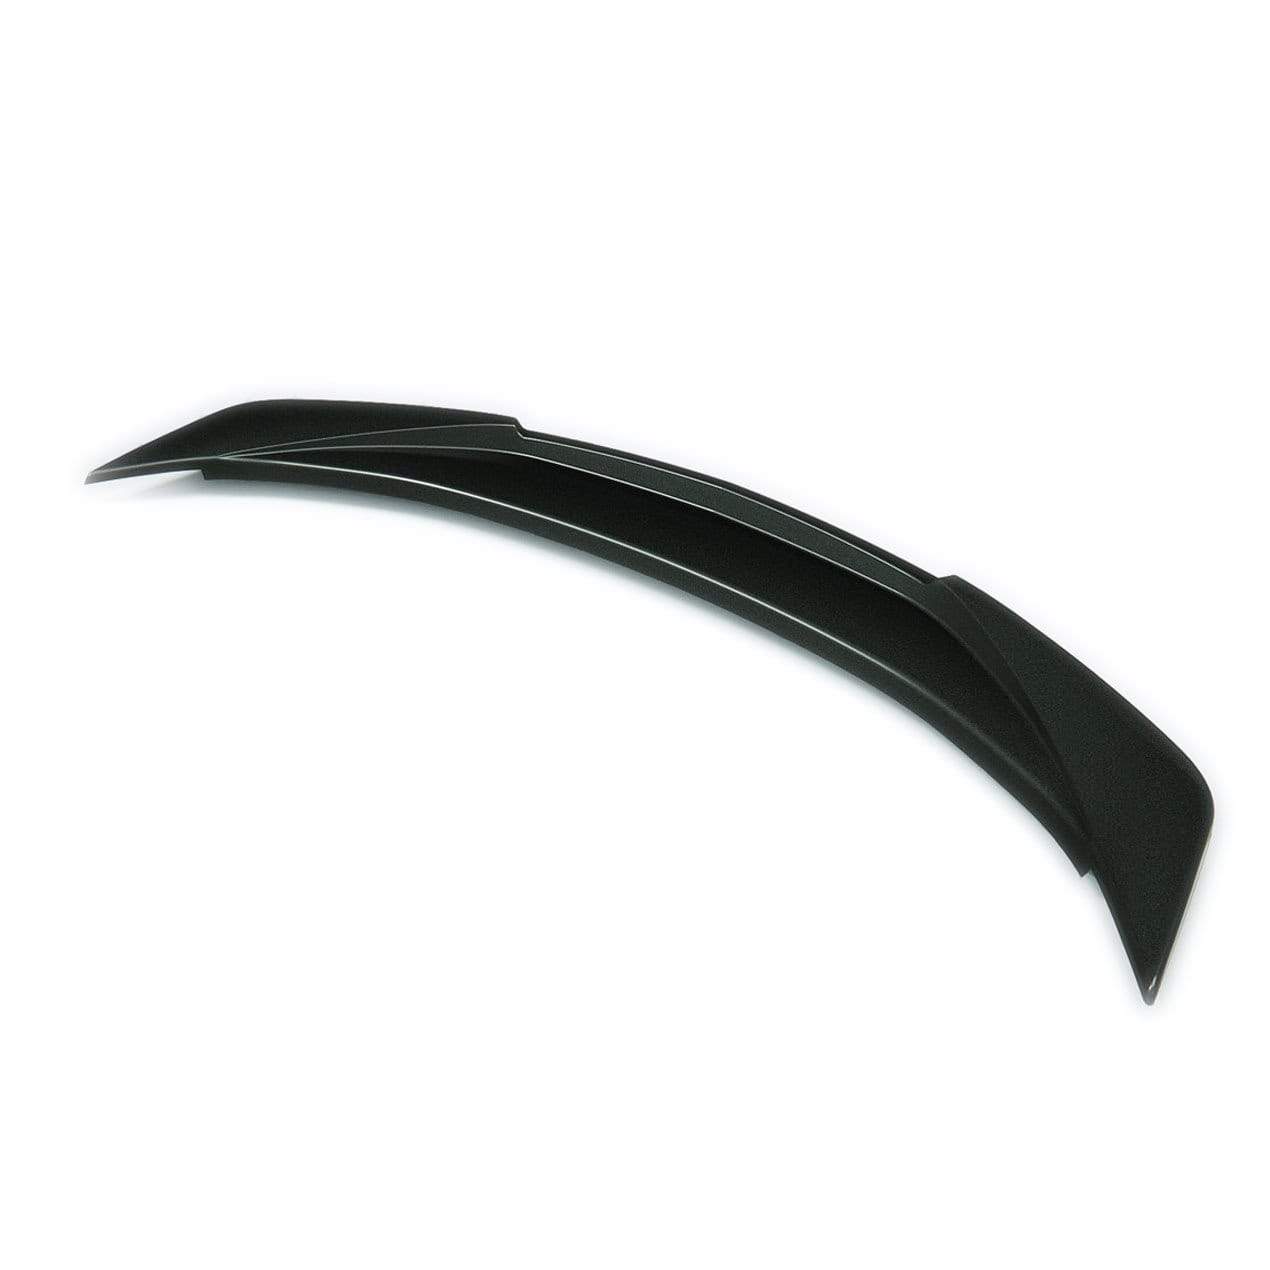 ACS Gen6 Rear Deck Spoiler for Camaro SS & ZL1 [48-4-013|48-4-103]PRM - Gloss Black - Improved Downforce - Direct Bolt-On Installation - ACS Composite